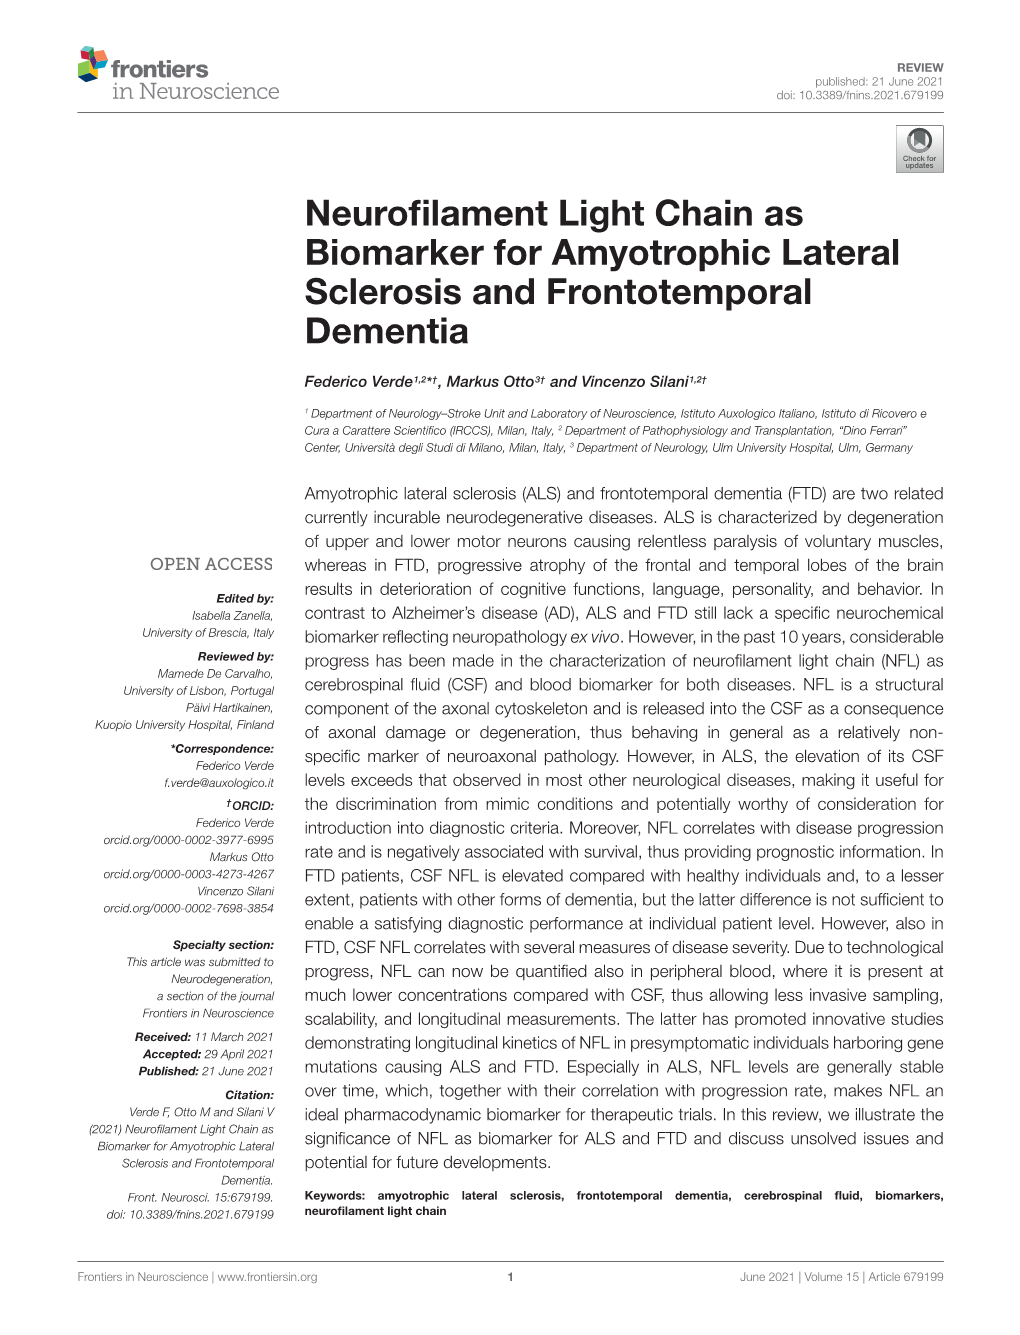 Neurofilament Light Chain As Biomarker for Amyotrophic Lateral